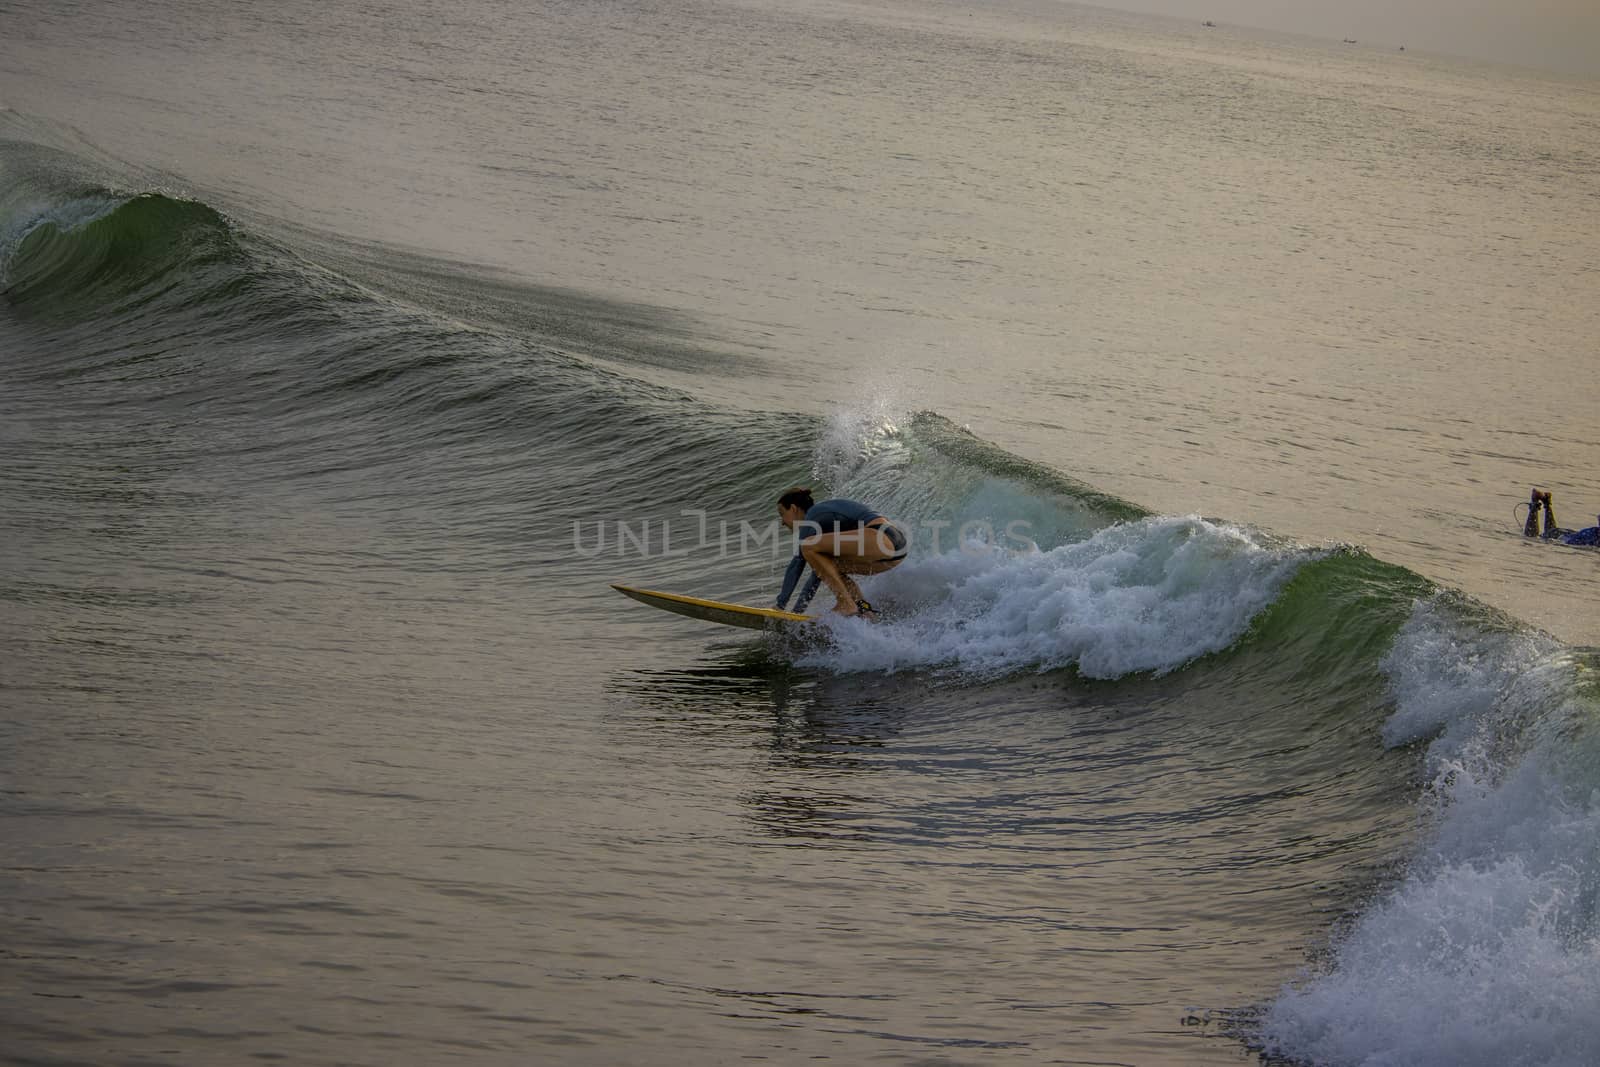 Chennai, Tamilnadu -India . September 2, 2020. A foreign girl swimming in the sea on the waves, surfing